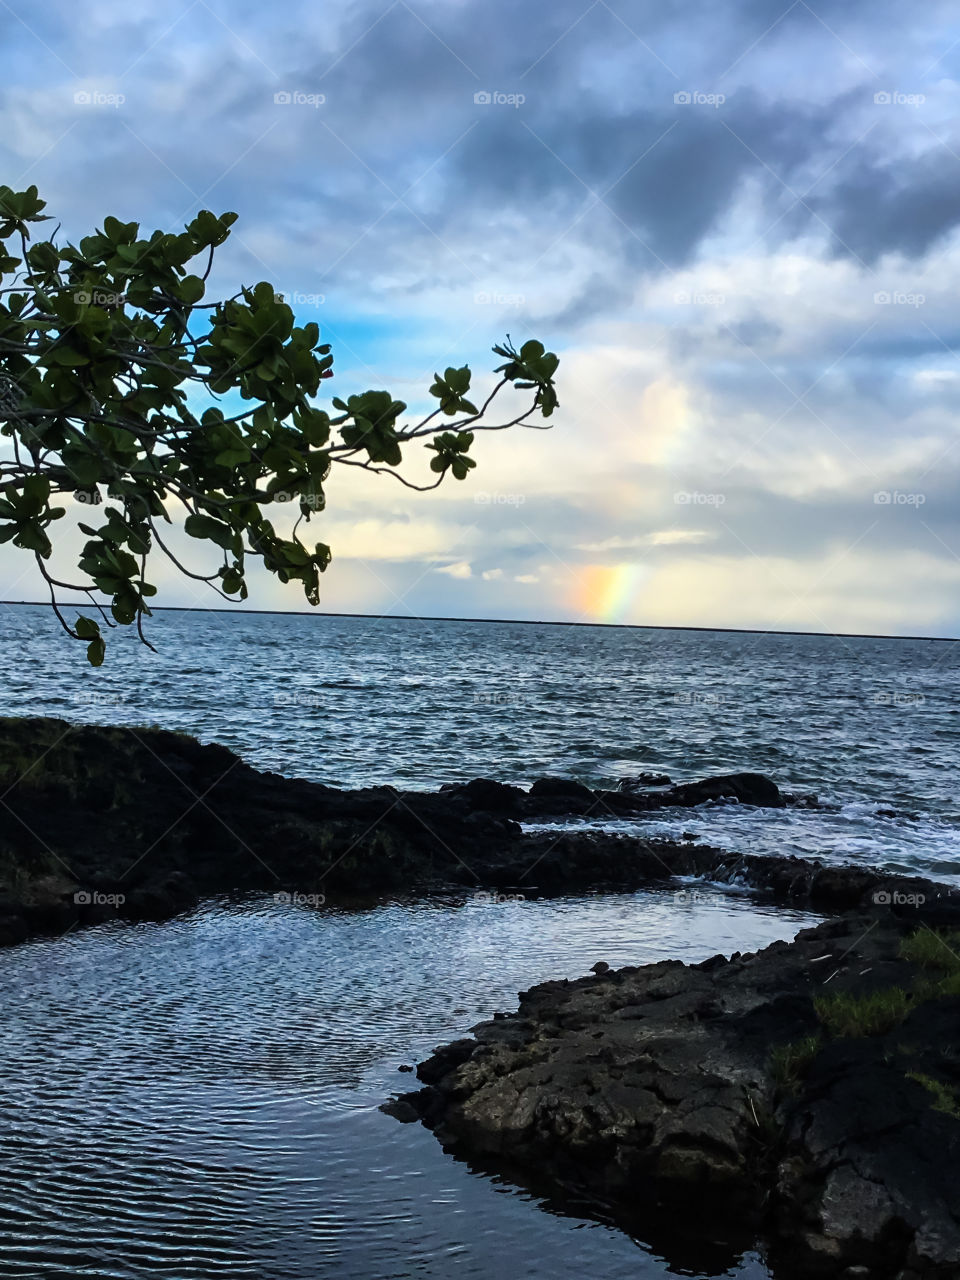 The beginning of a rainbow on Hilo Bay